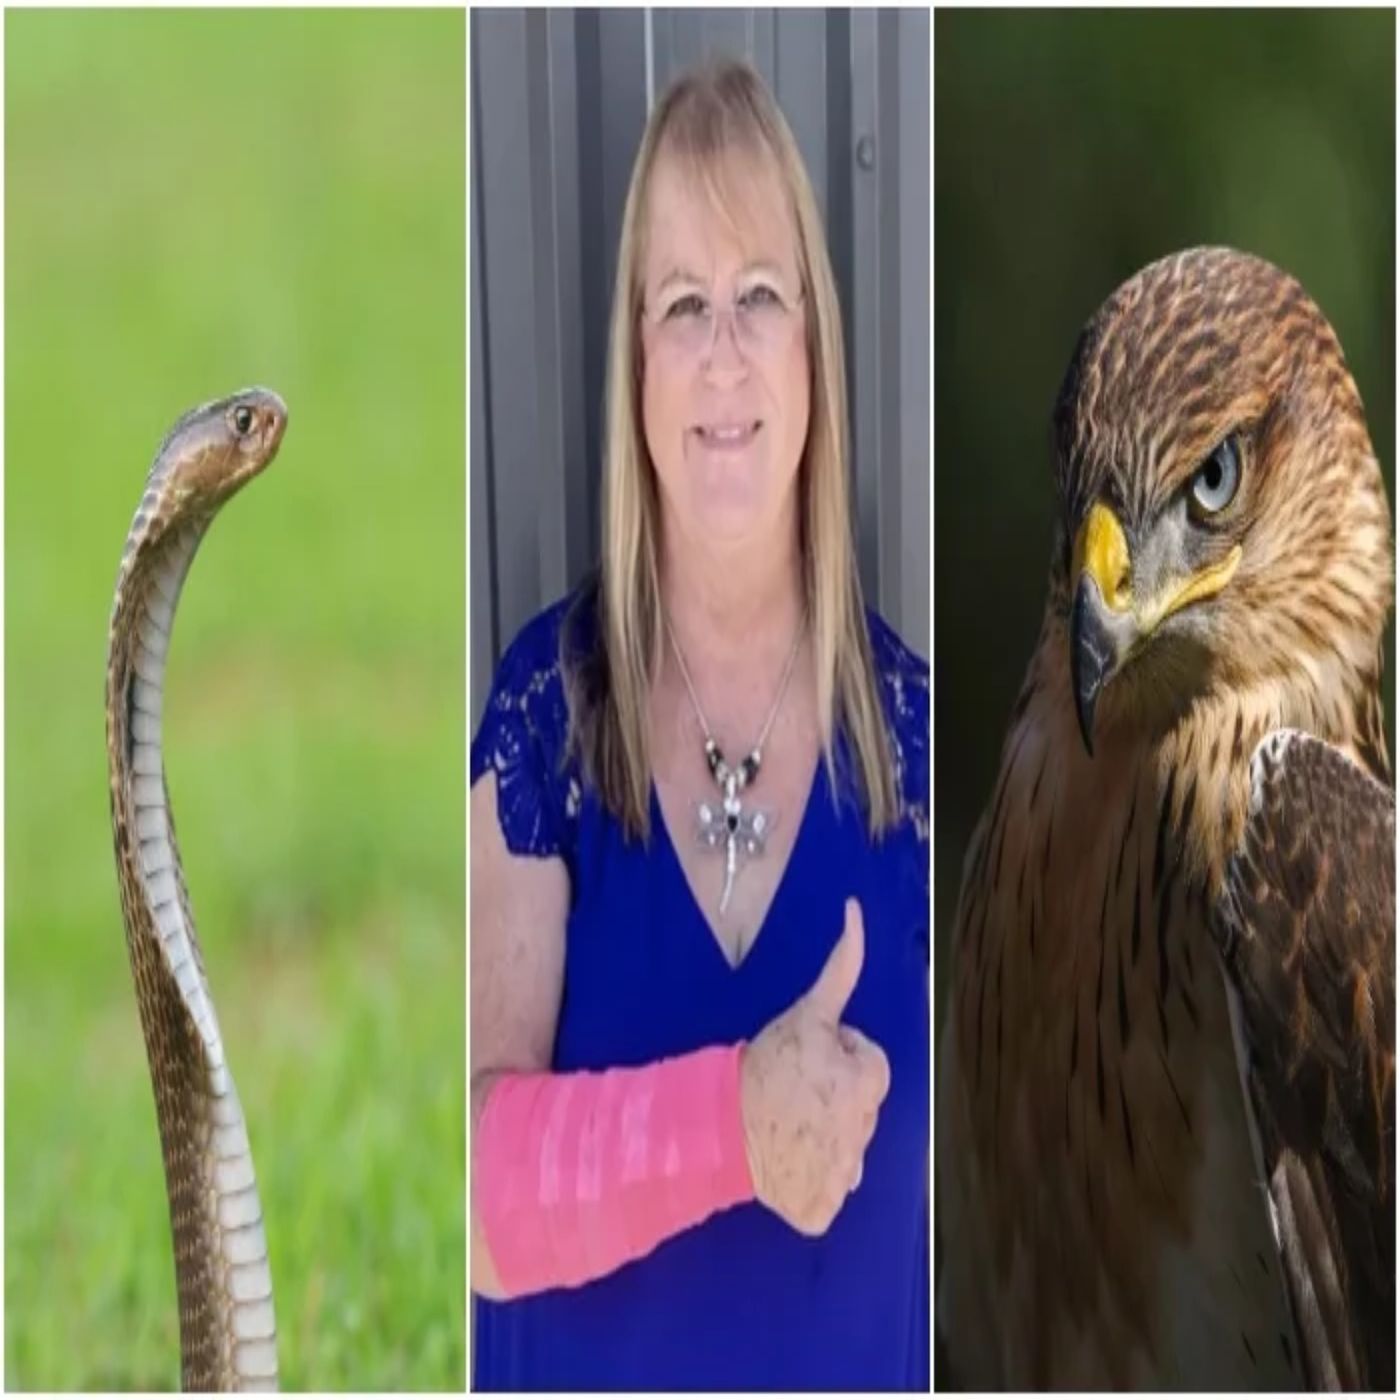 A hawk a snake and a wounded woman.